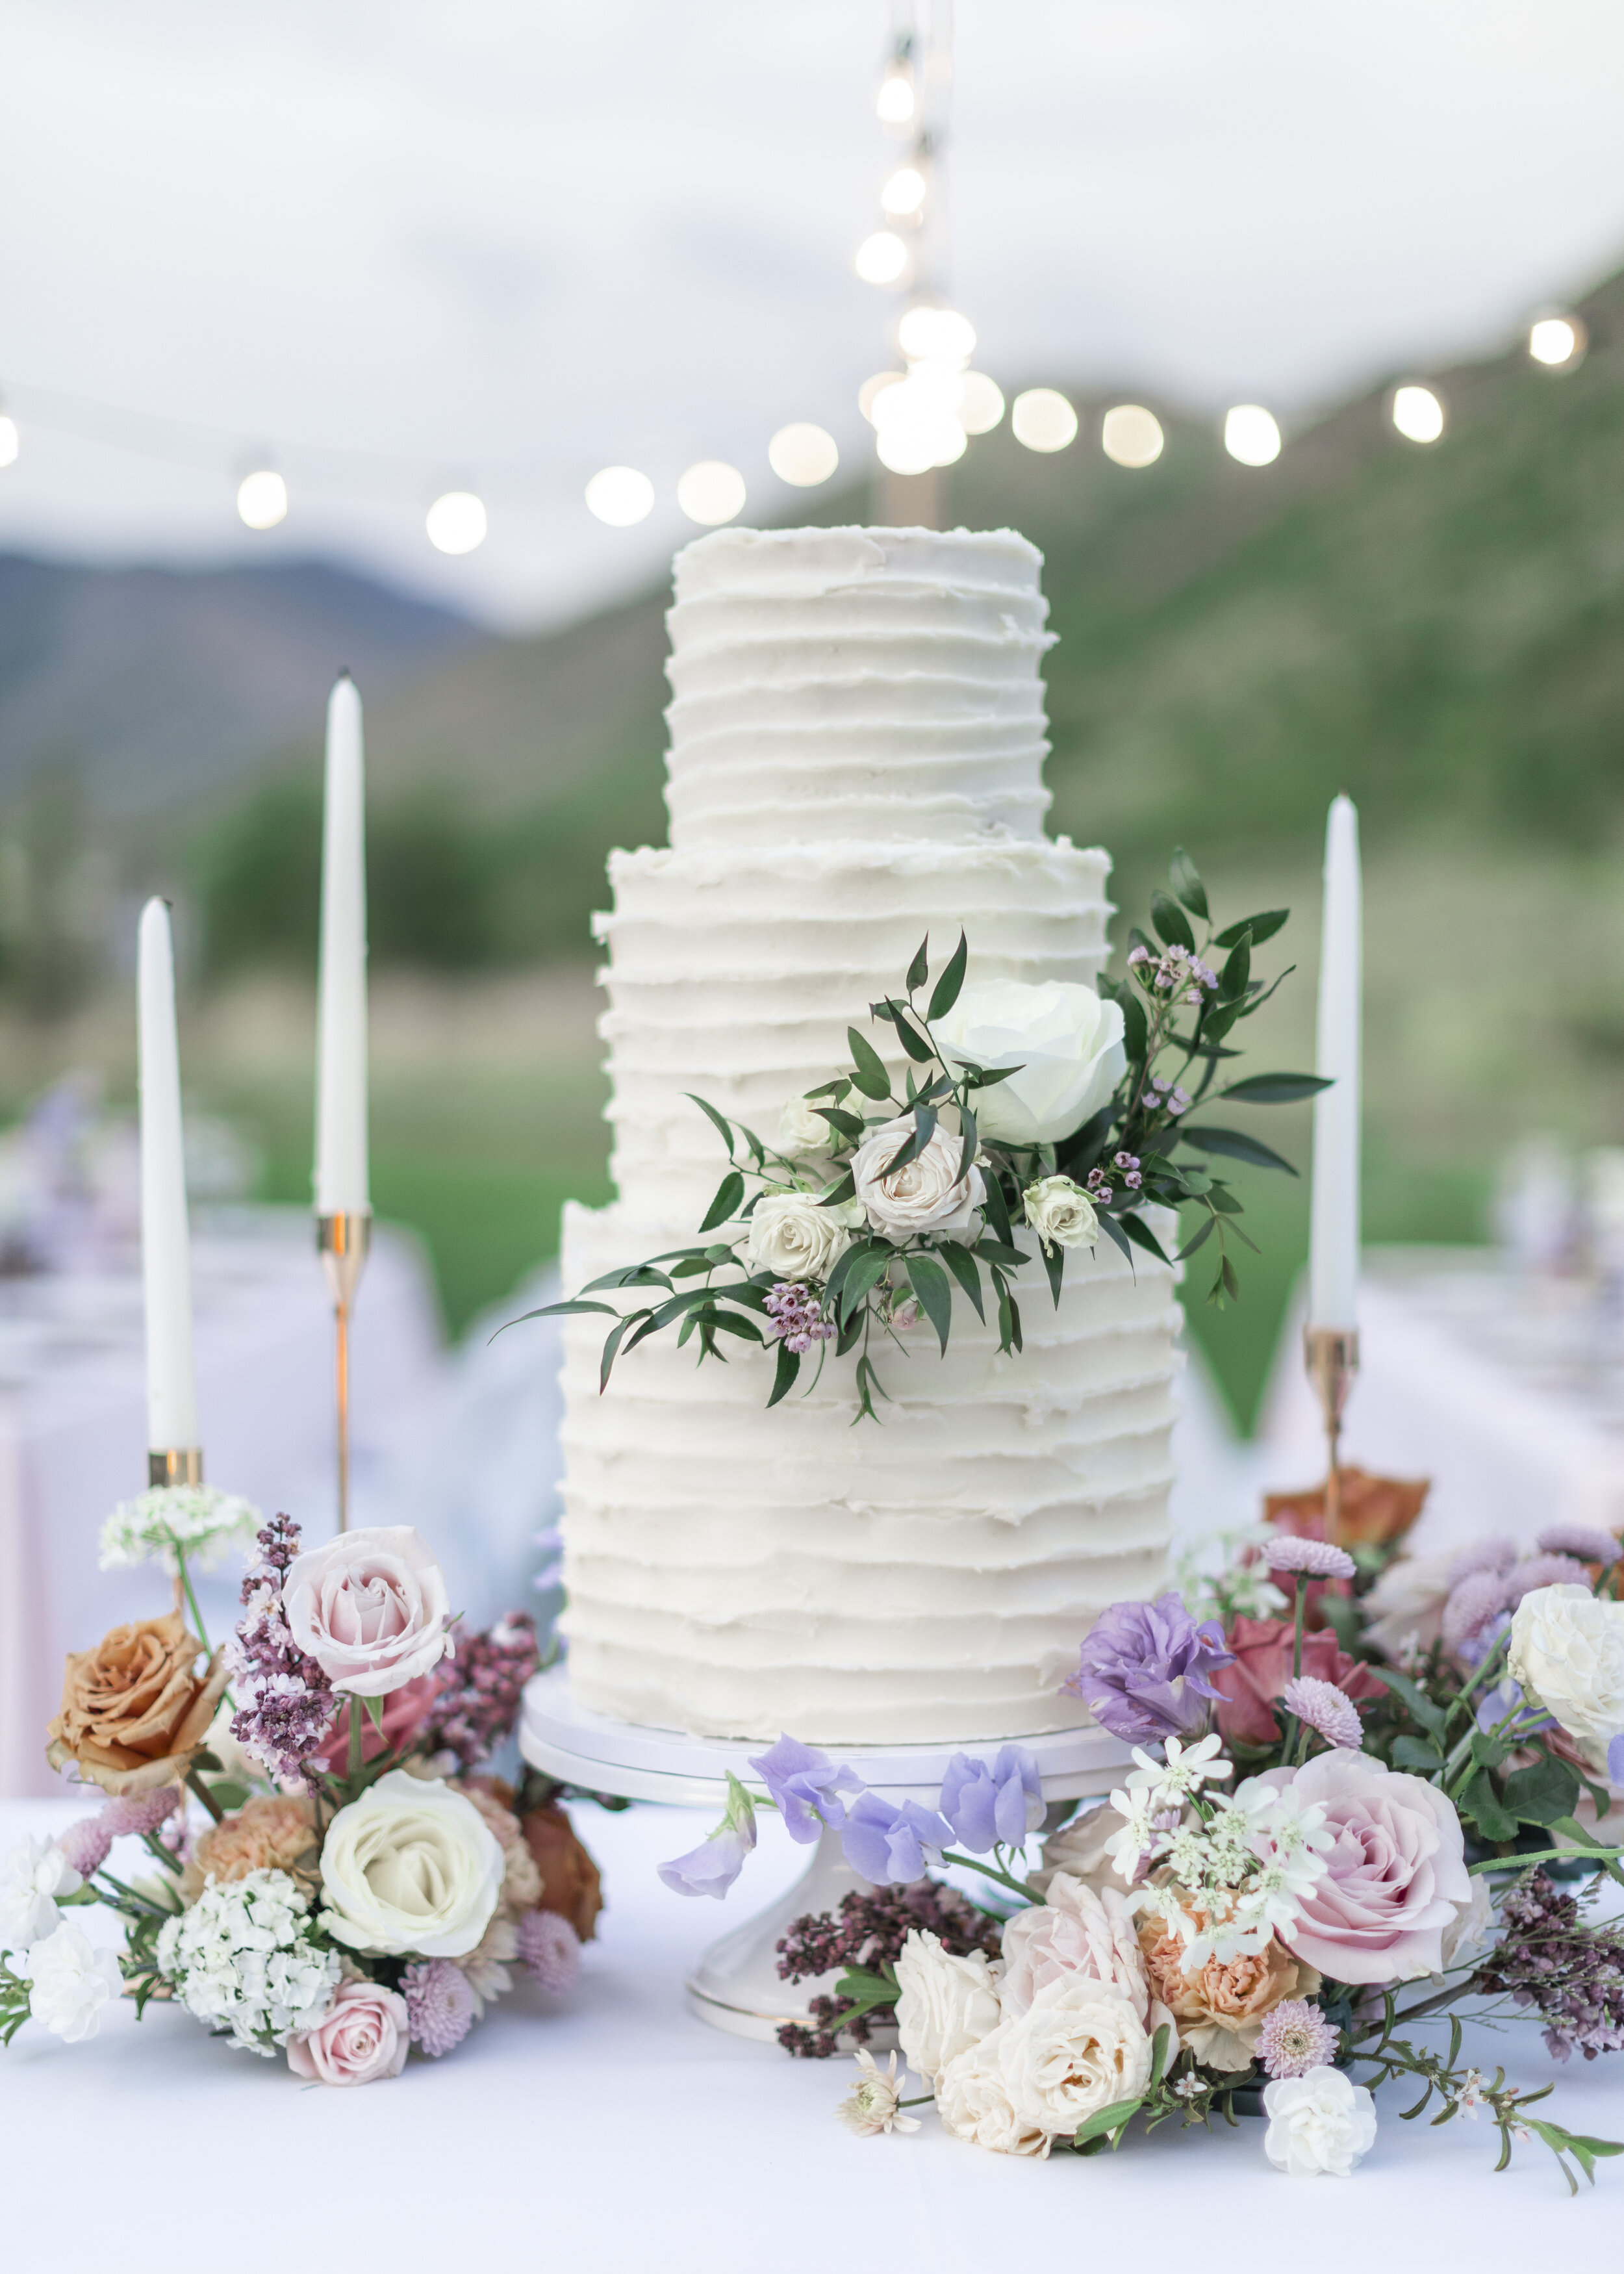  Three-tier wedding cake with beautiful table set up and fresh florals at a wedding day workshop with Clarity Lane Photography in Logan, Utah. wedding cake photography tips three-tier wedding cake #claritylanephotography #claritylaneweddings #clarity